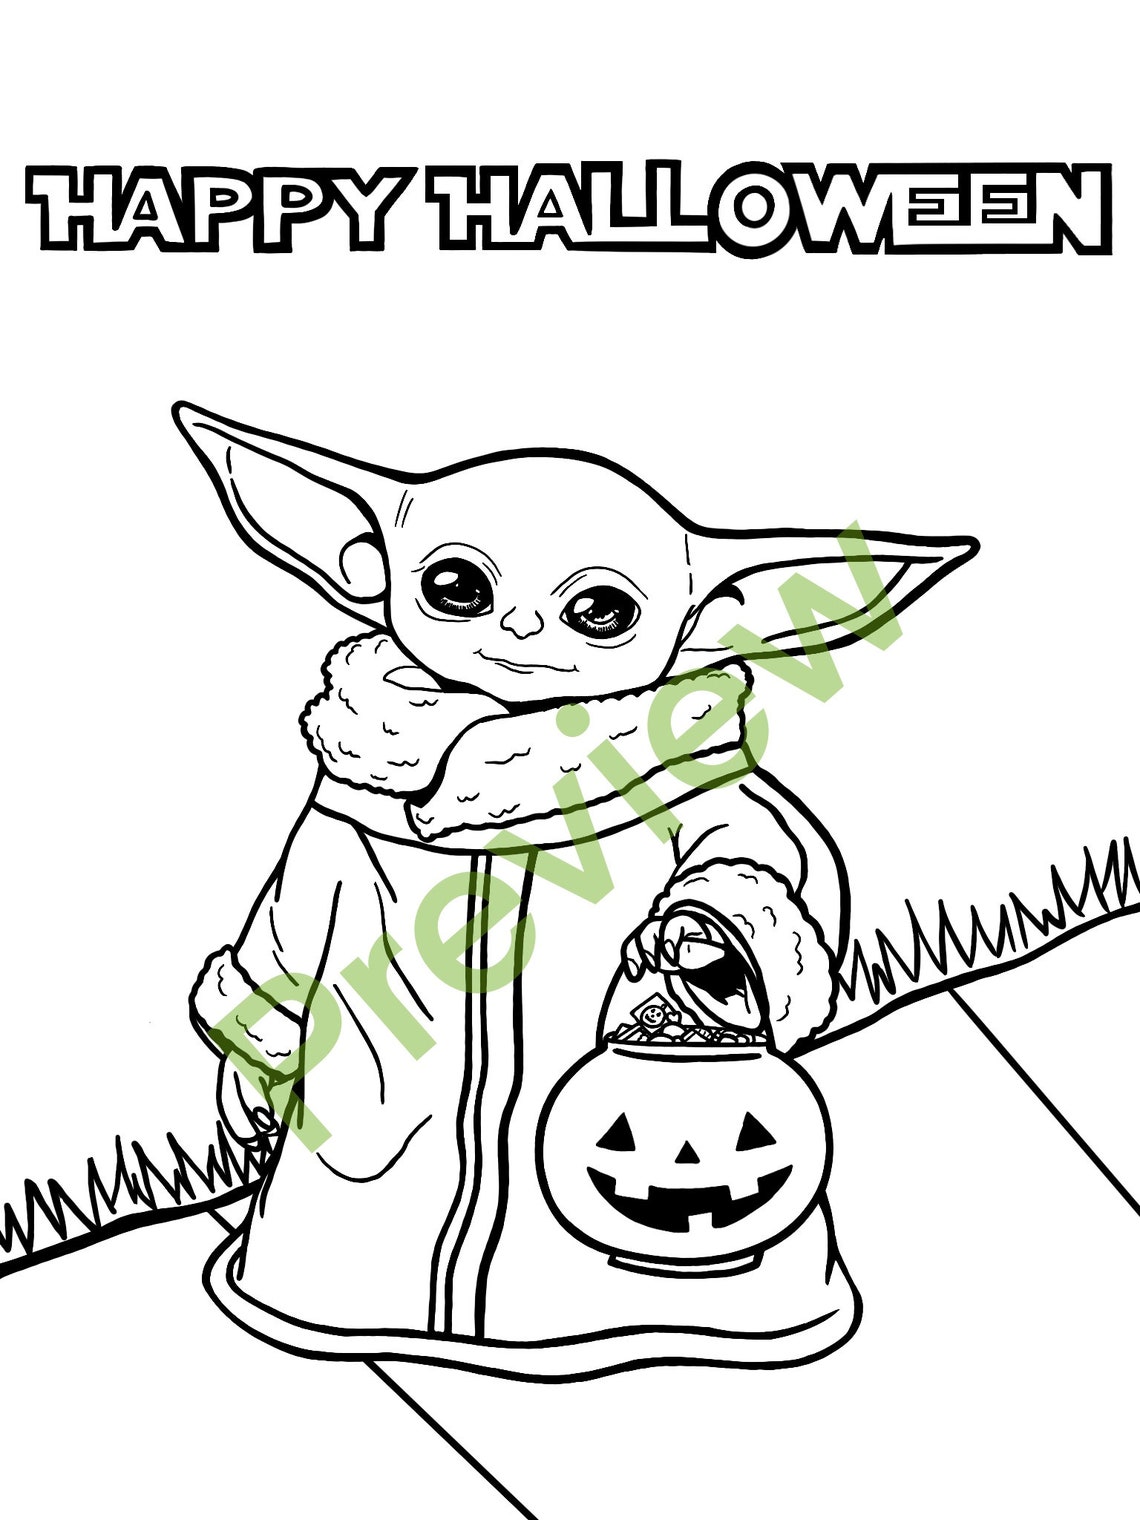 5 baby yoda holiday coloring pages etsy